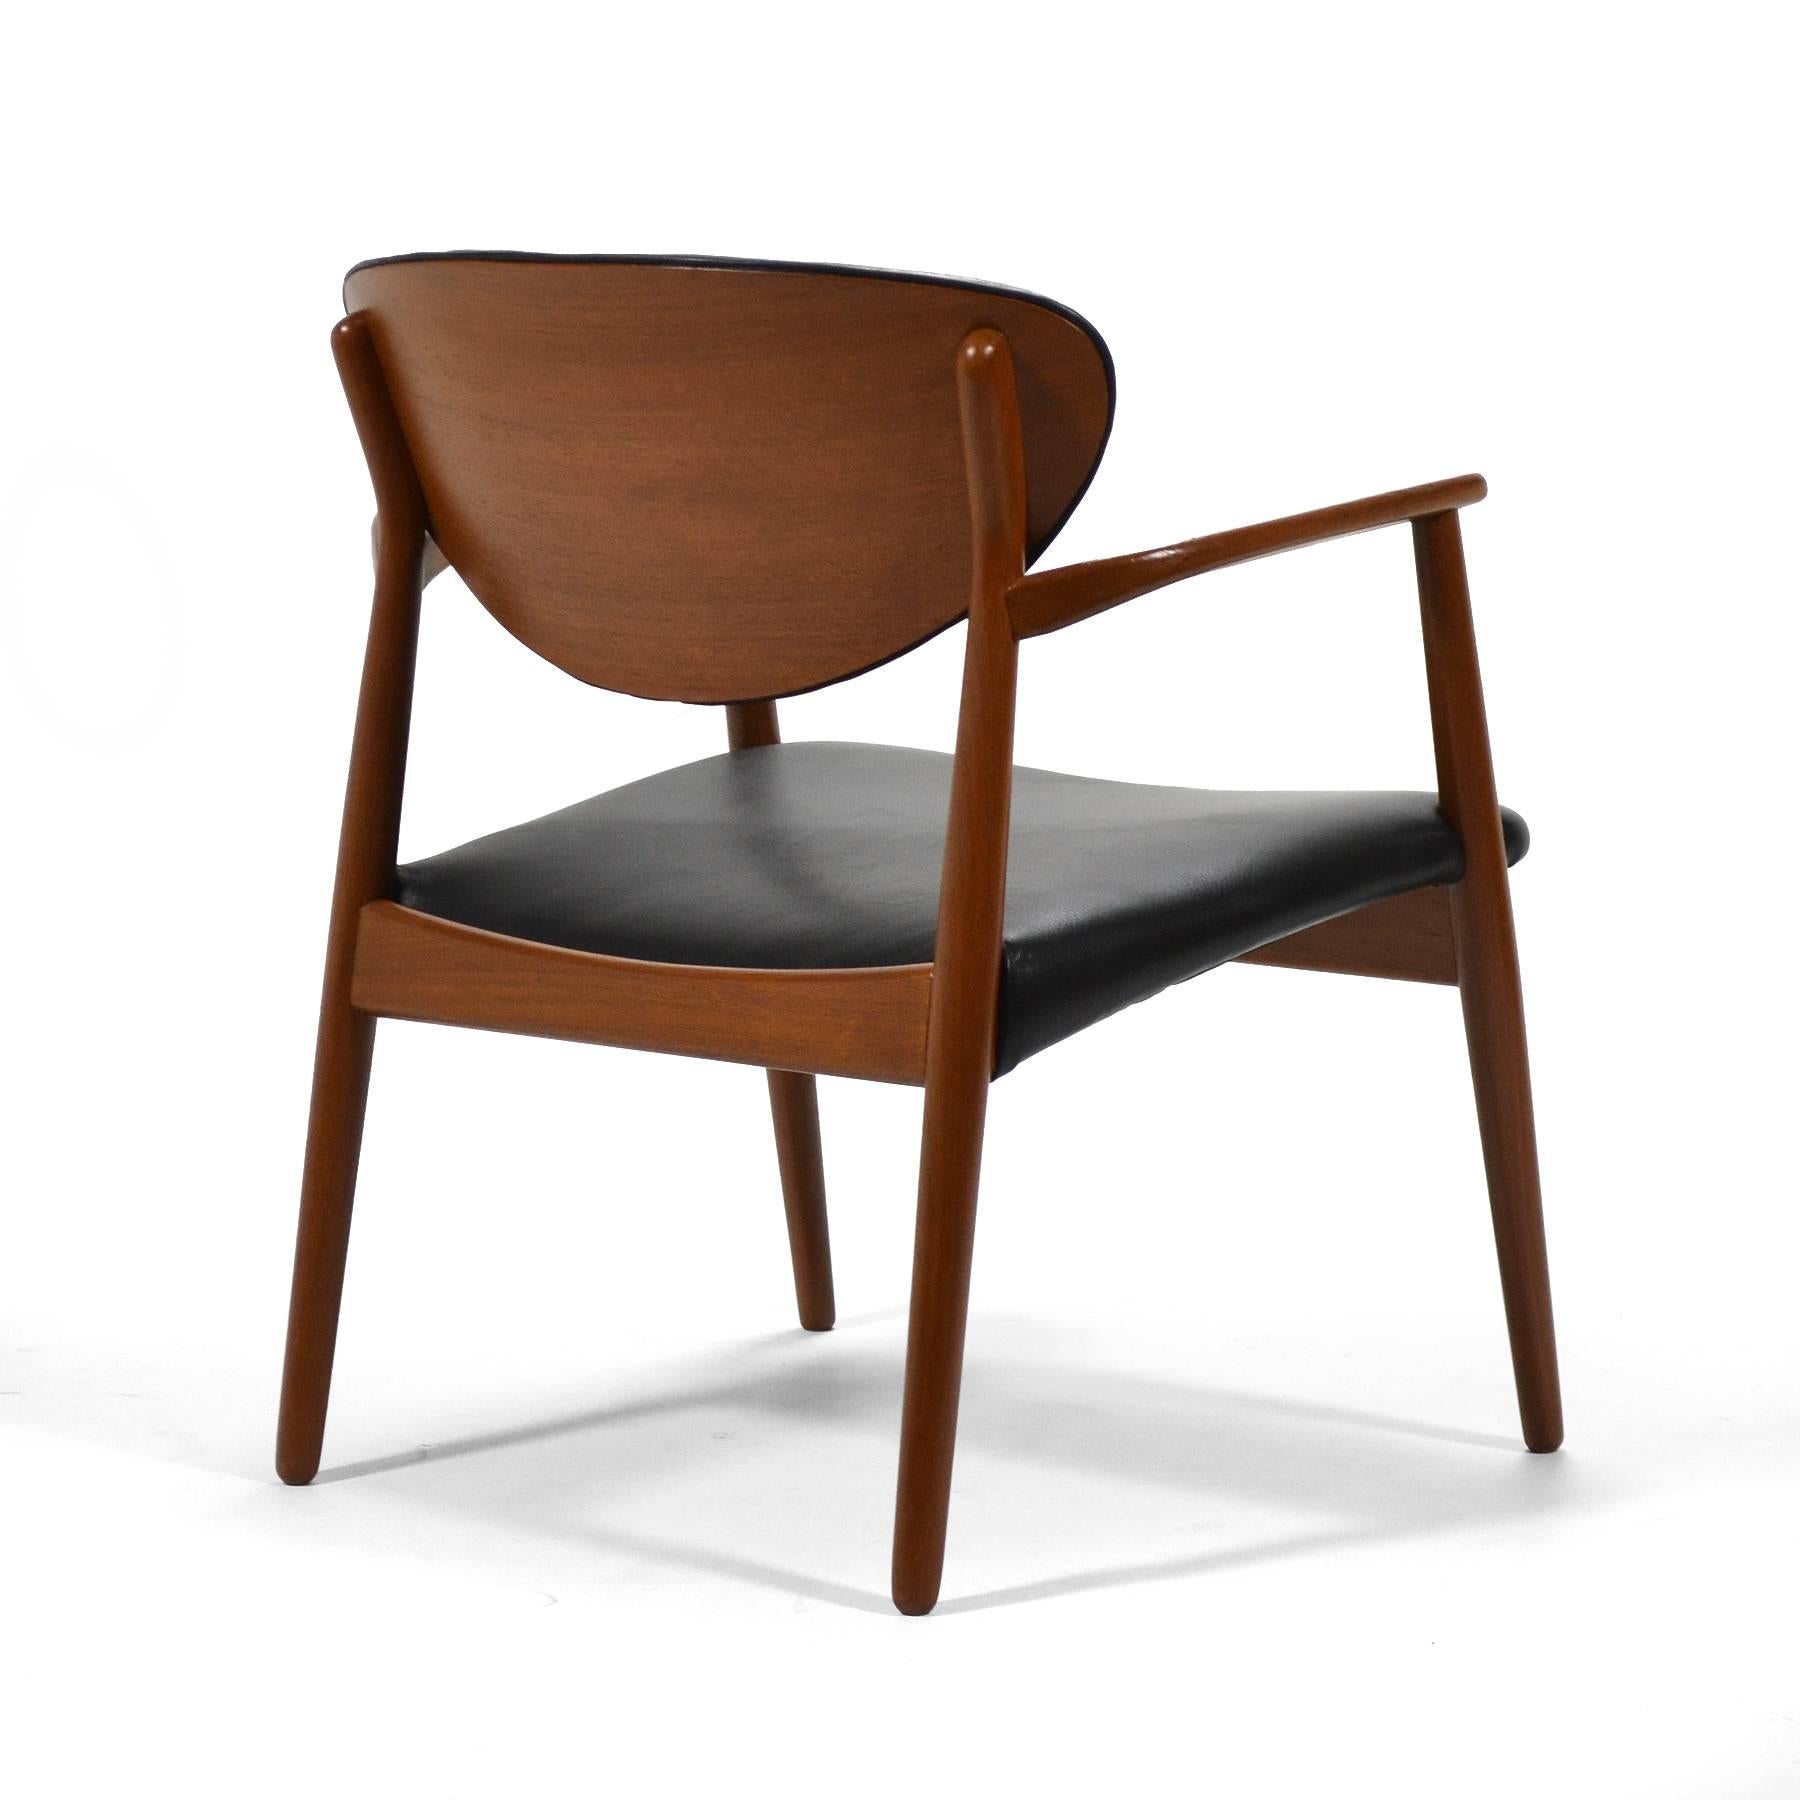 This handsome chair designed in 1959 by Ejnar Larsen and Aksel Bender Madsen for Næstved Møbelfabrik has a rakish stance and many wonderful details. The nicely scaled and comfortable chair has a sculptural teak frame with a newly upholstered black